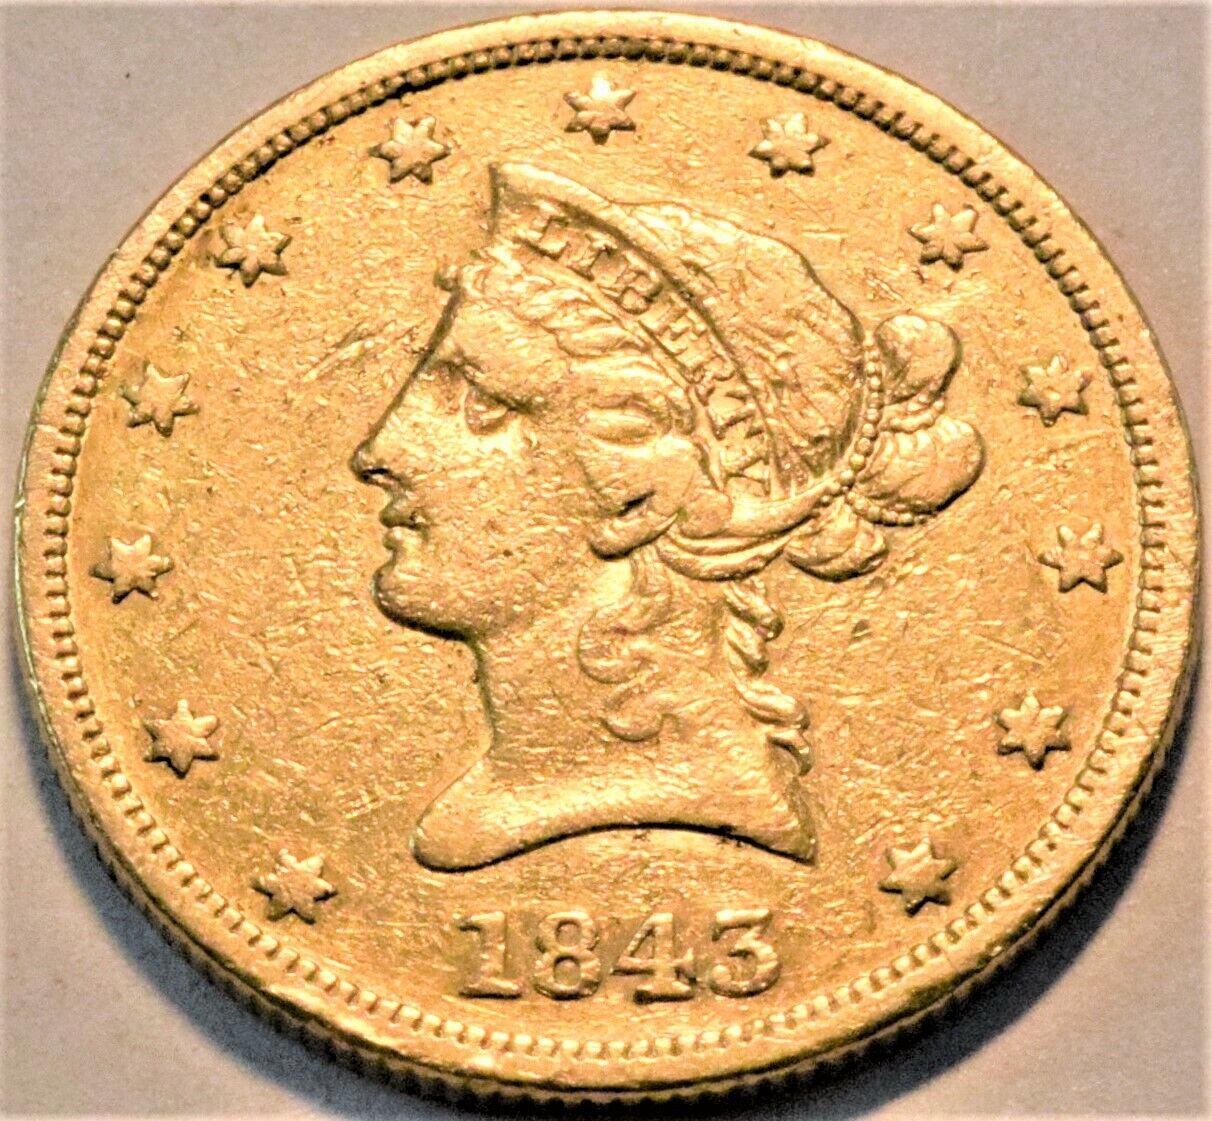 Now free shipping 1843 $10 Gold Liberty Eagle Better It is very popular Middle Det Date Early Grade